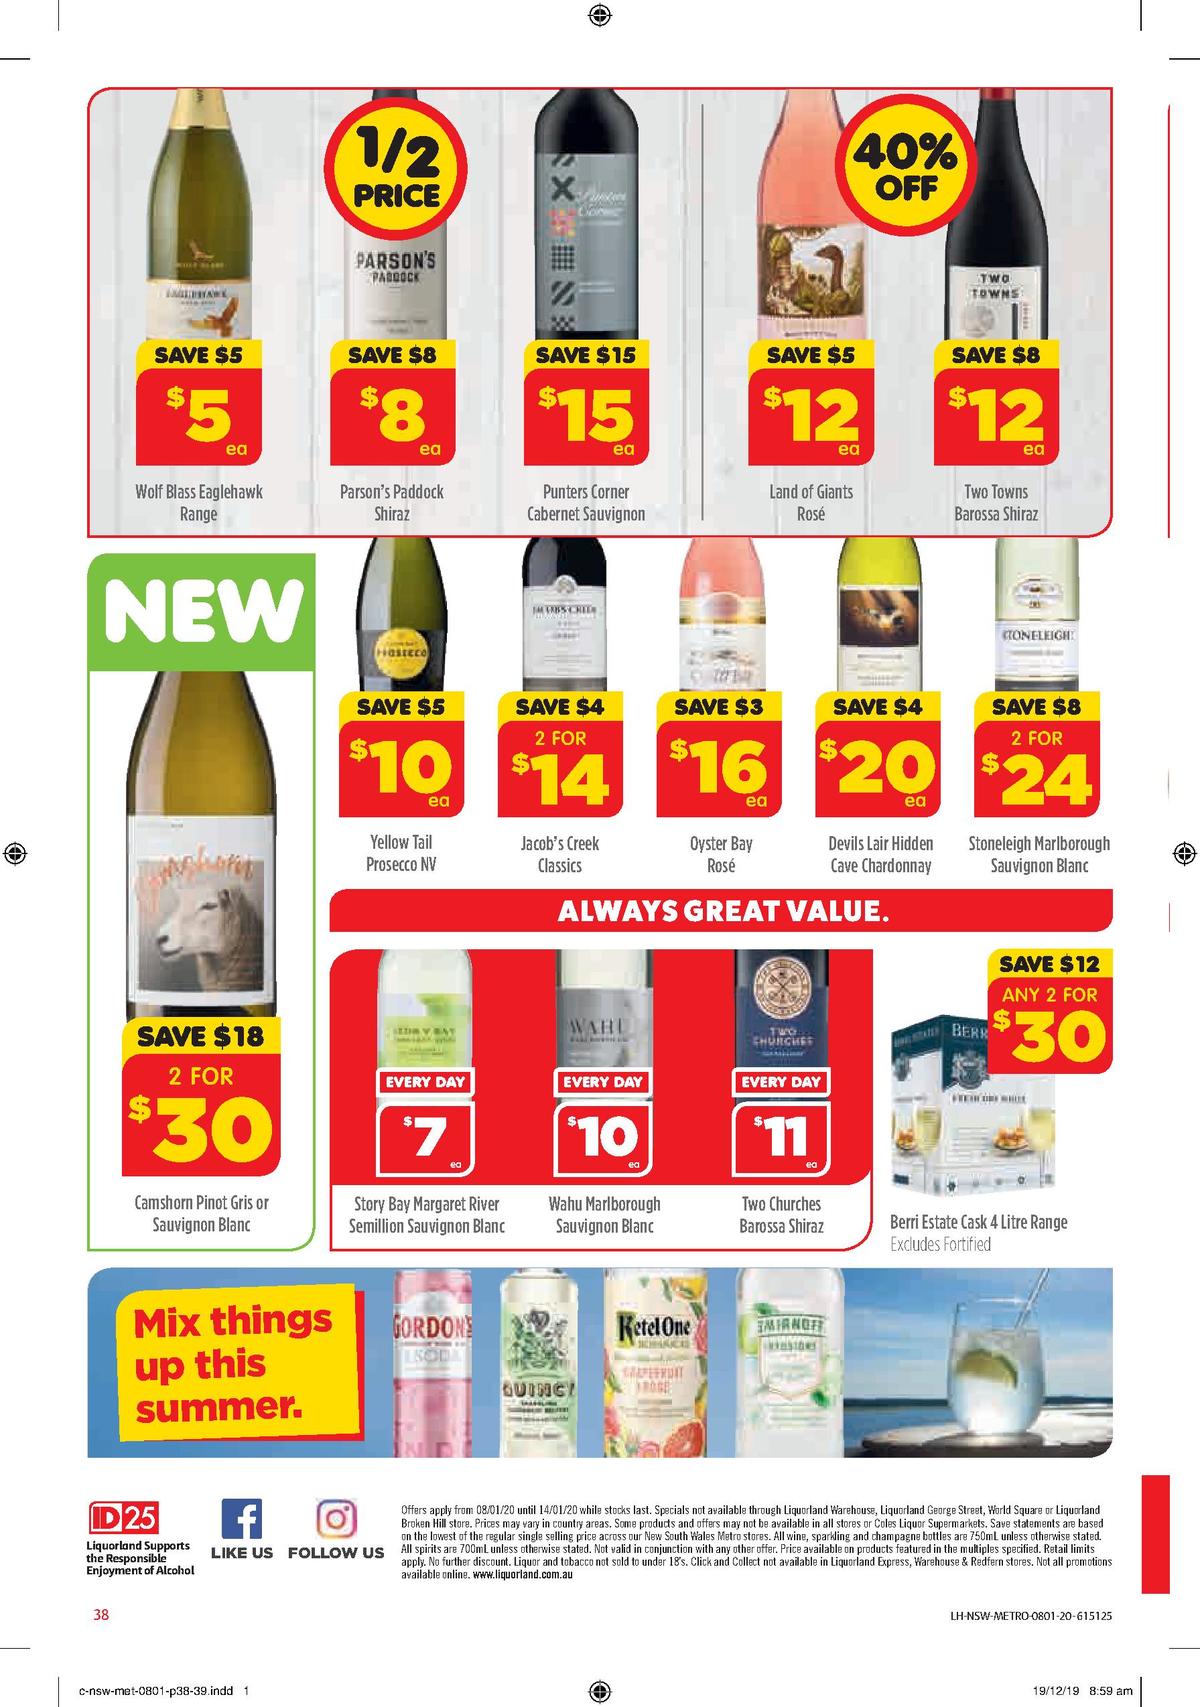 Coles Catalogues from 8 January